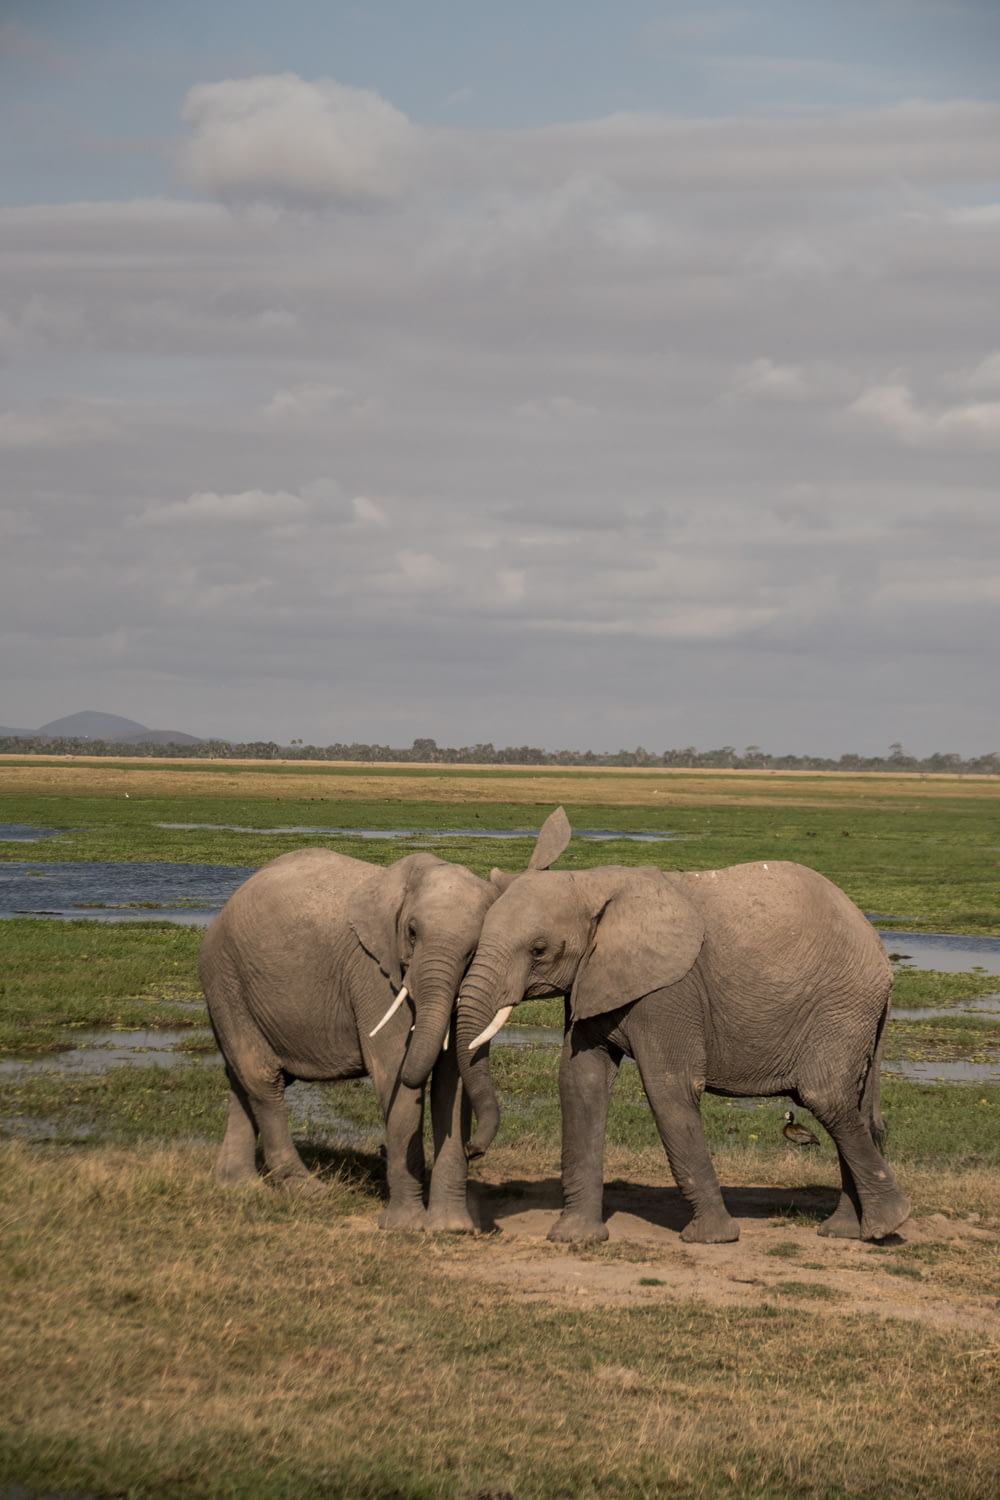 two elephants standing next to each other in a field